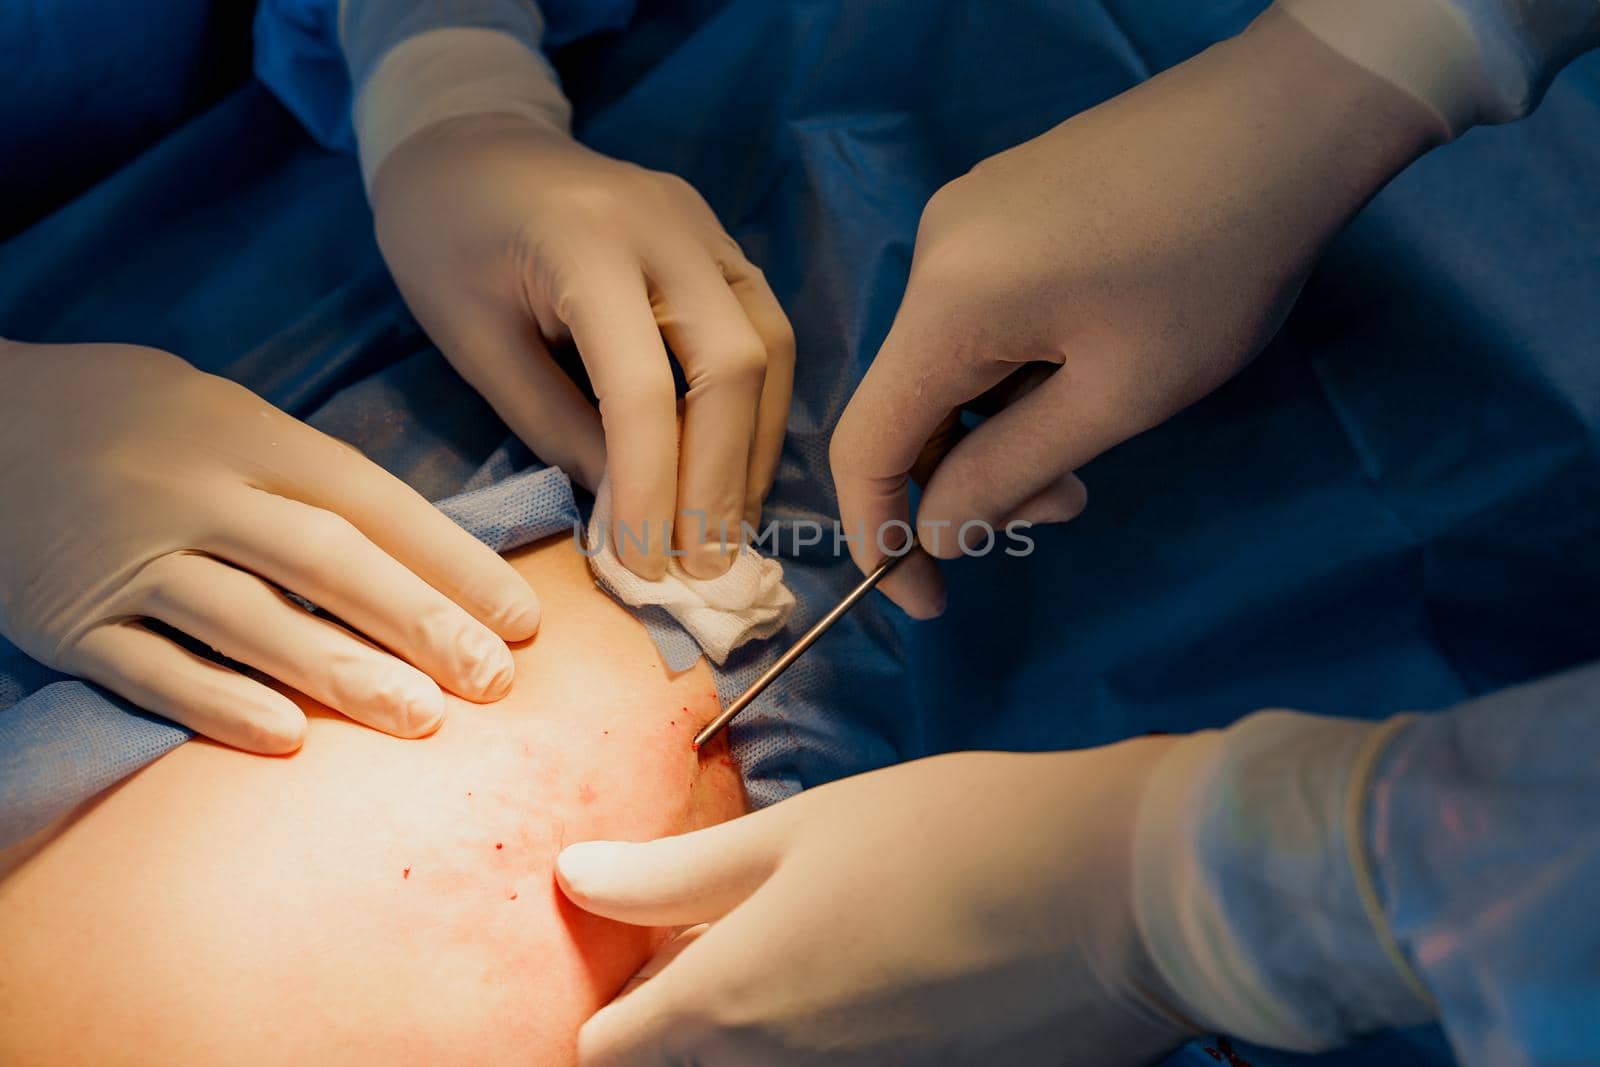 Liposuction for lipofilling surgery operation. close-up photo of 2 surgeon do plastic surgery named blepharoplasty in medical clinic.